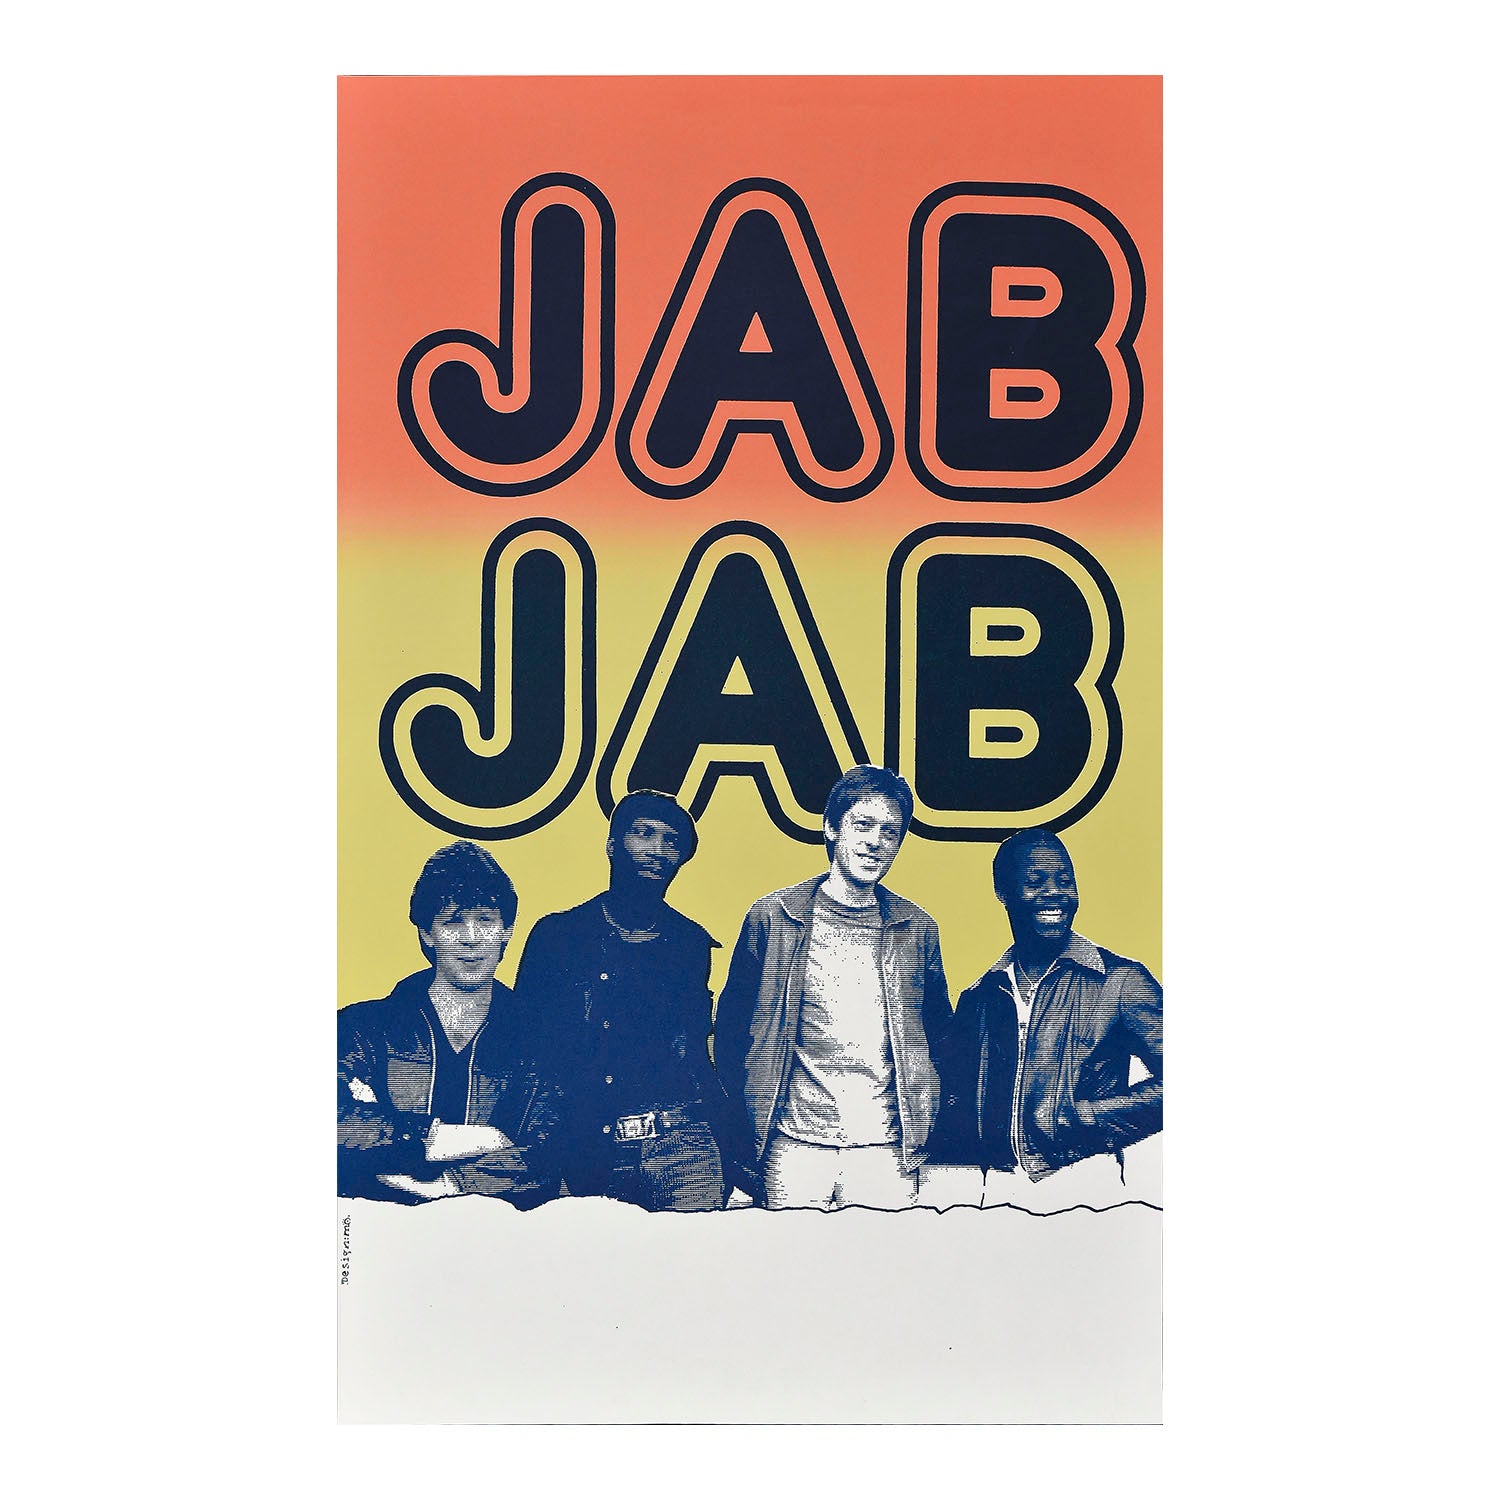 original promotional poster for the Huddersfield rock reggae band, Jab Jab, c. 1978. The bottom section is printed blank for details of performances to be added later.